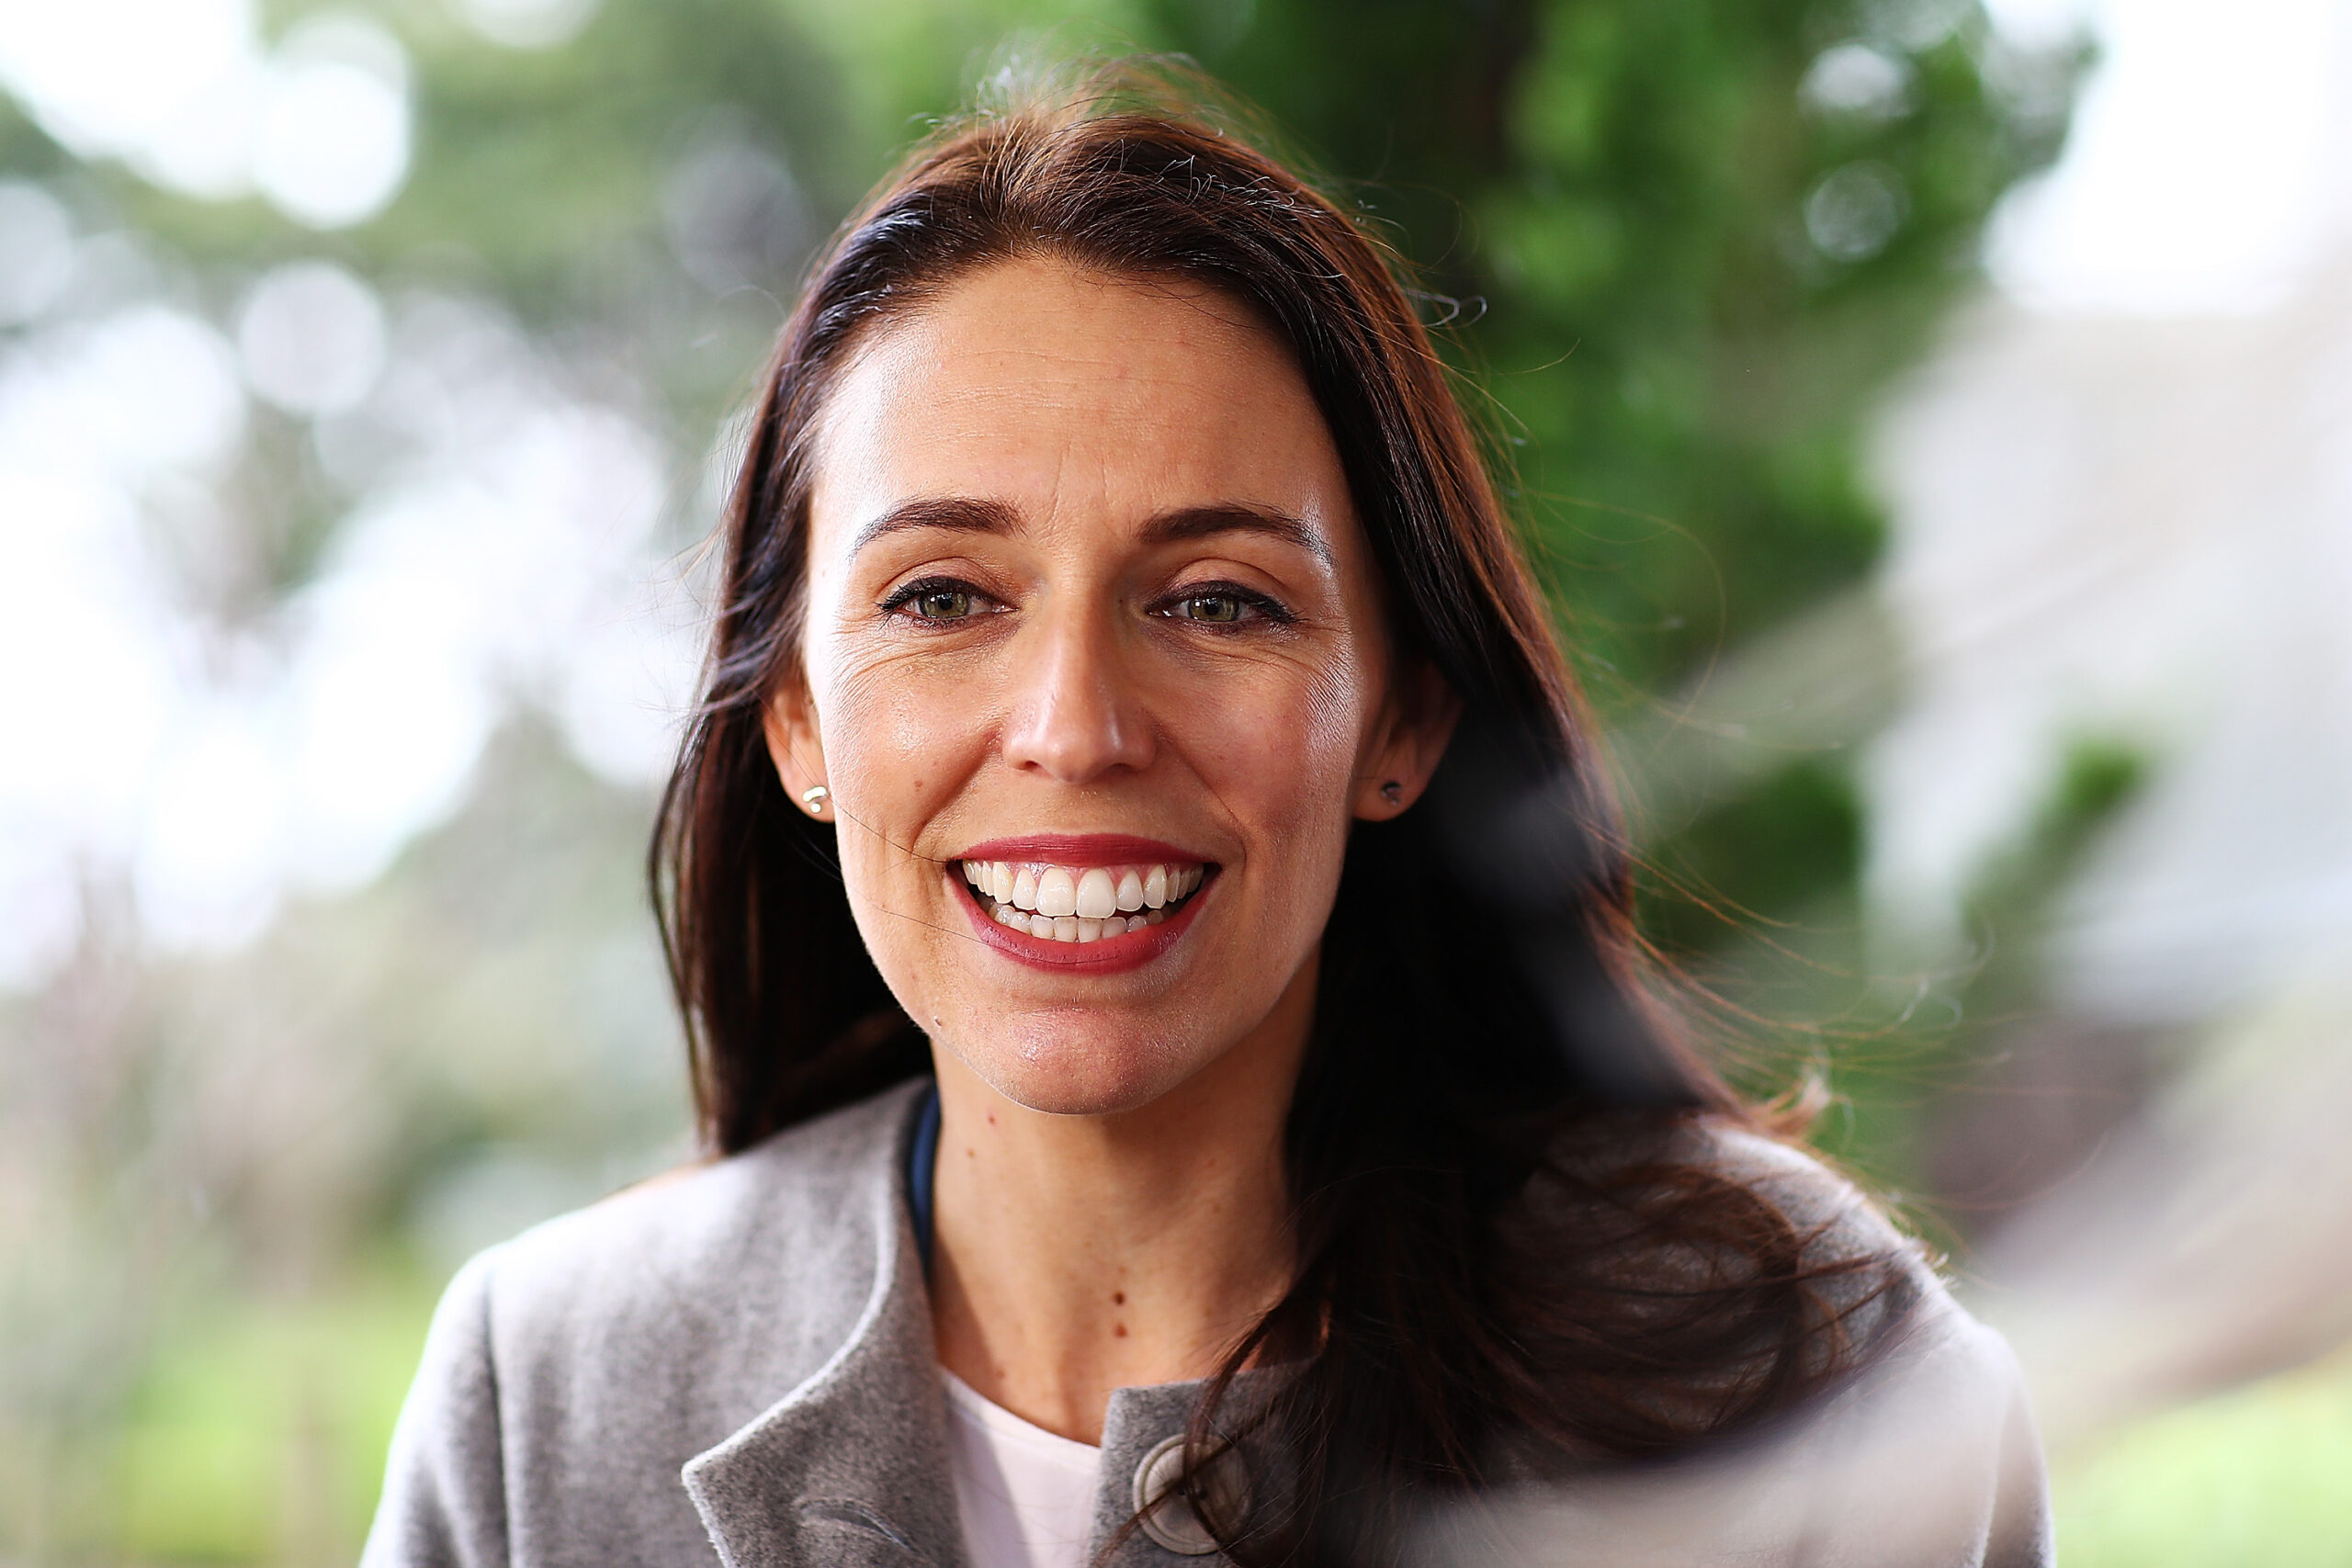 The defining moment that drove Jacinda Ardern to make a difference